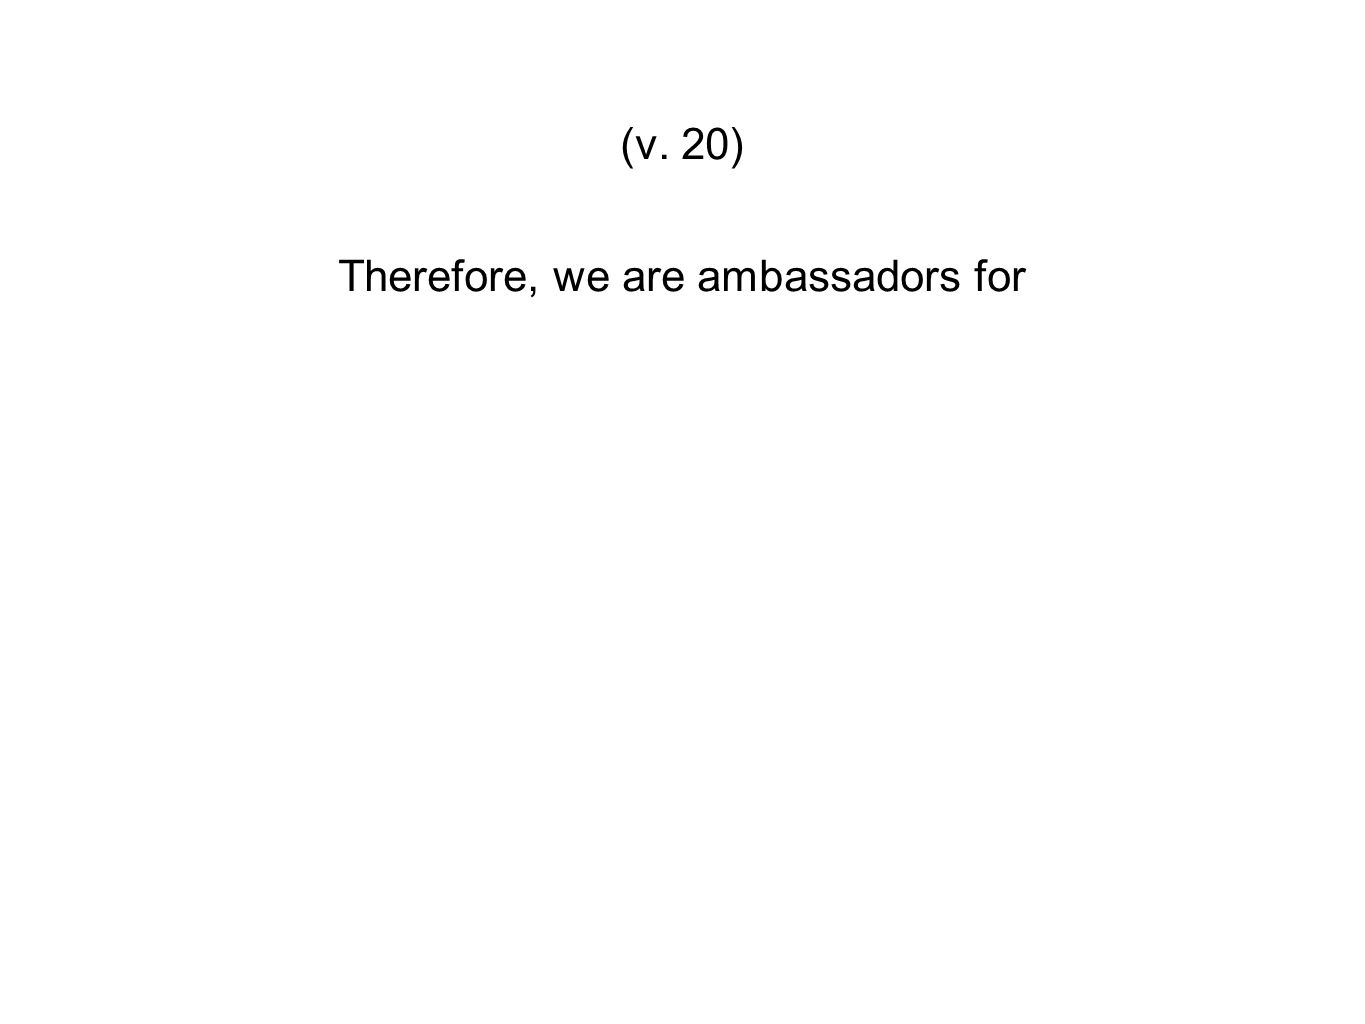 Therefore, we are ambassadors for